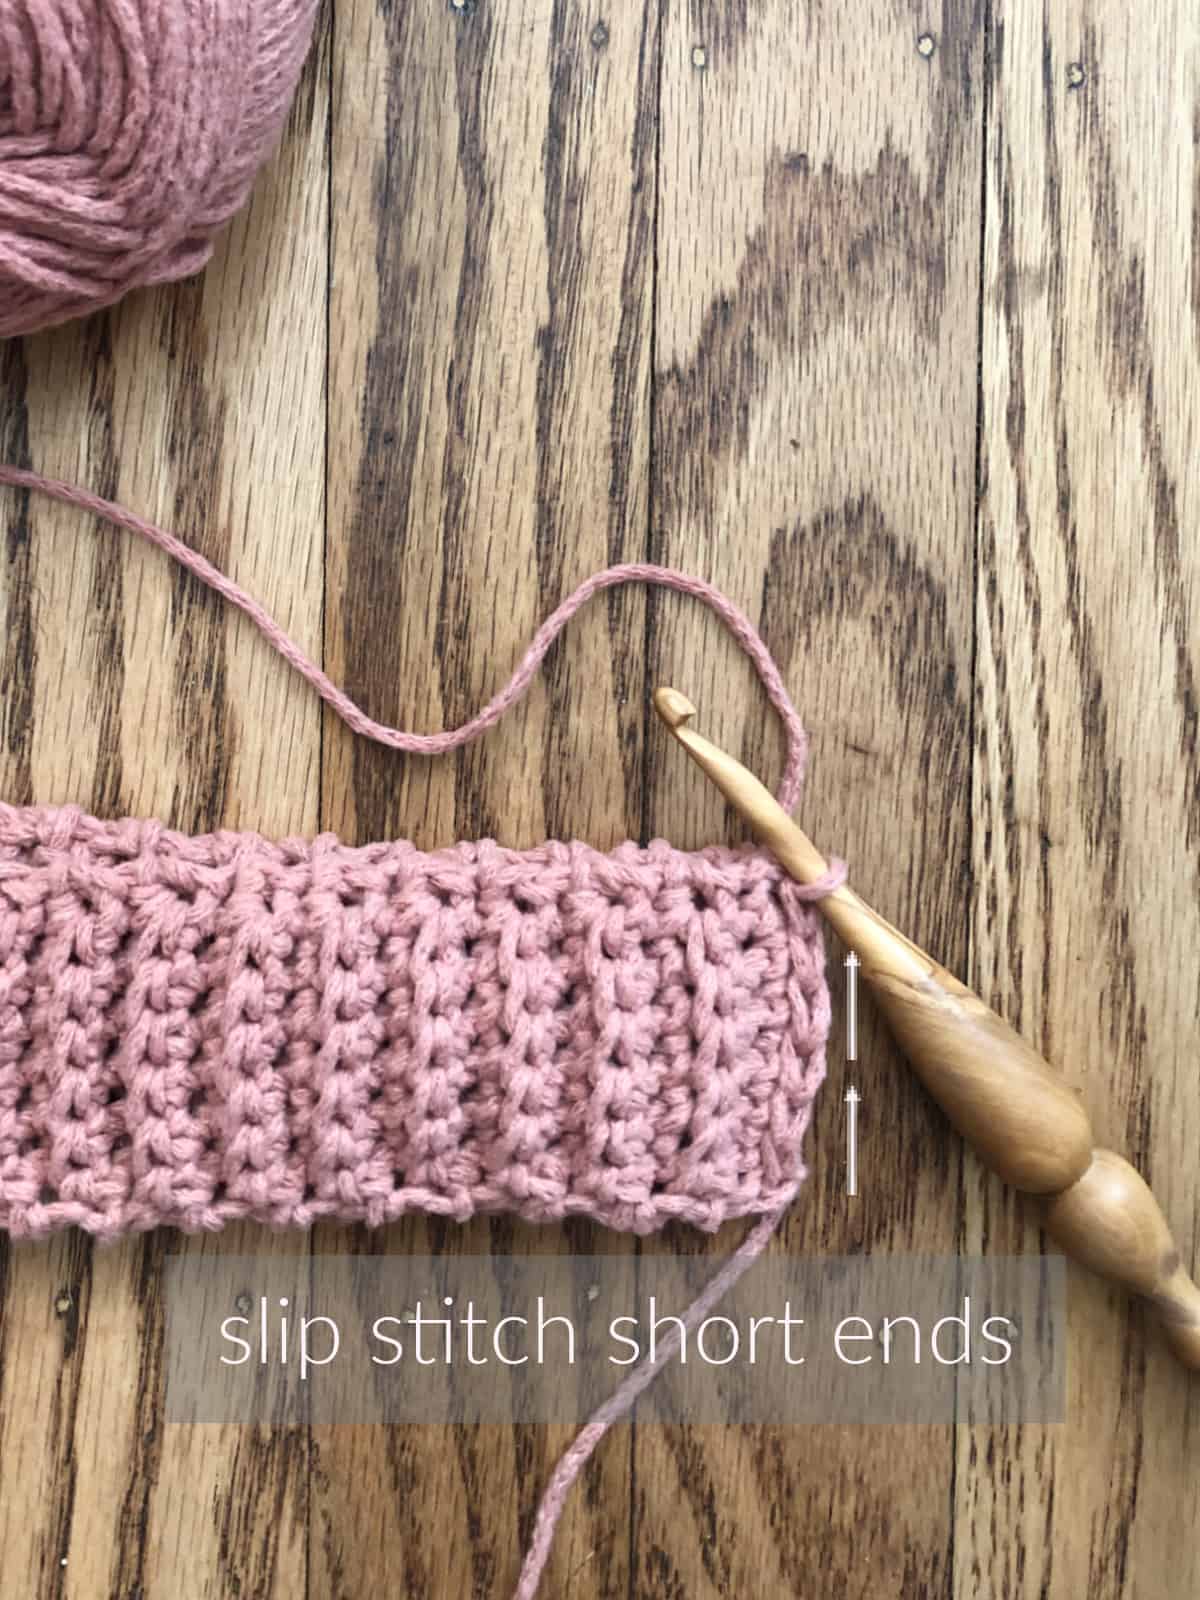 Crochet ribbing for bottom up hat in pink yarn with wood hook and words that say to slip stitch short ends.